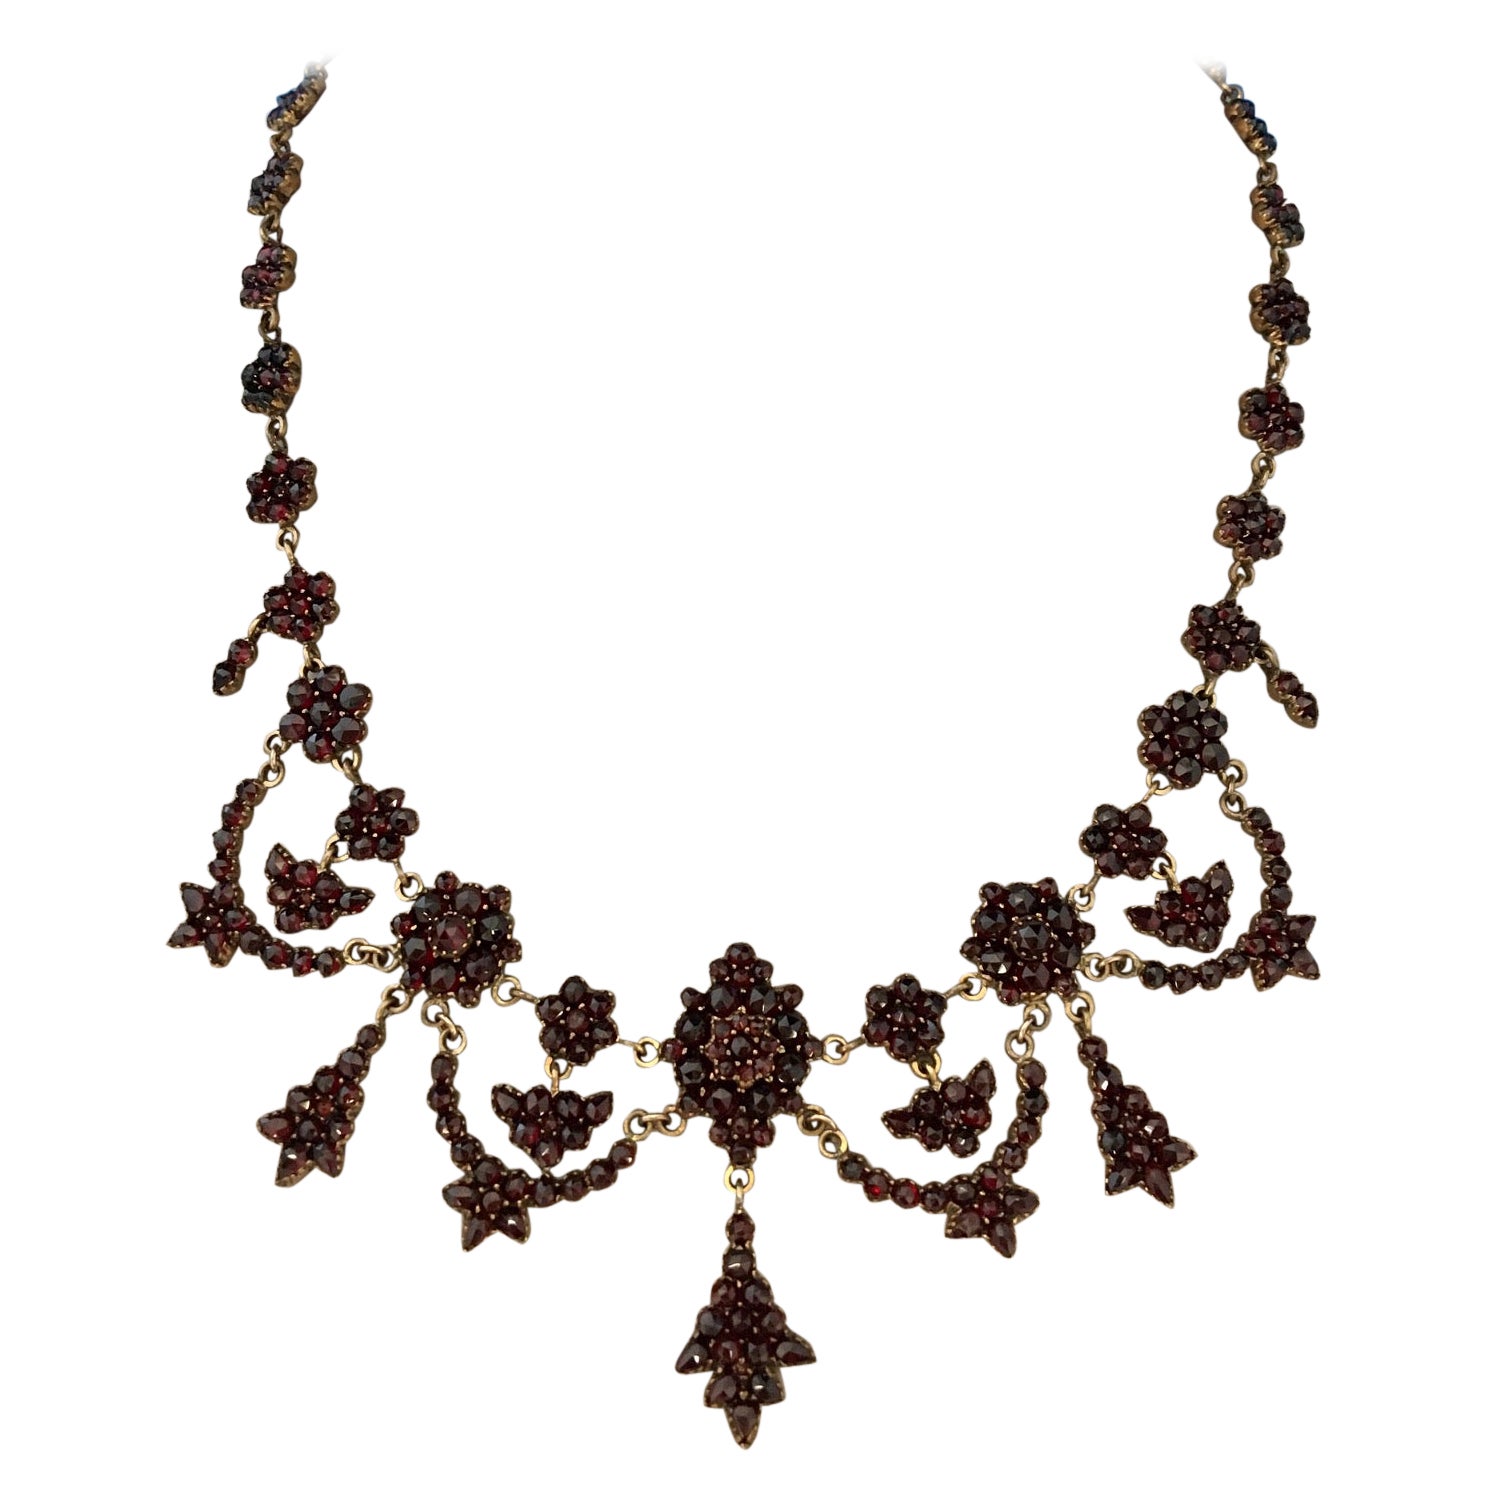 Bohemian Garnet Necklace with Swags Vintage Antique Victorian #J5240